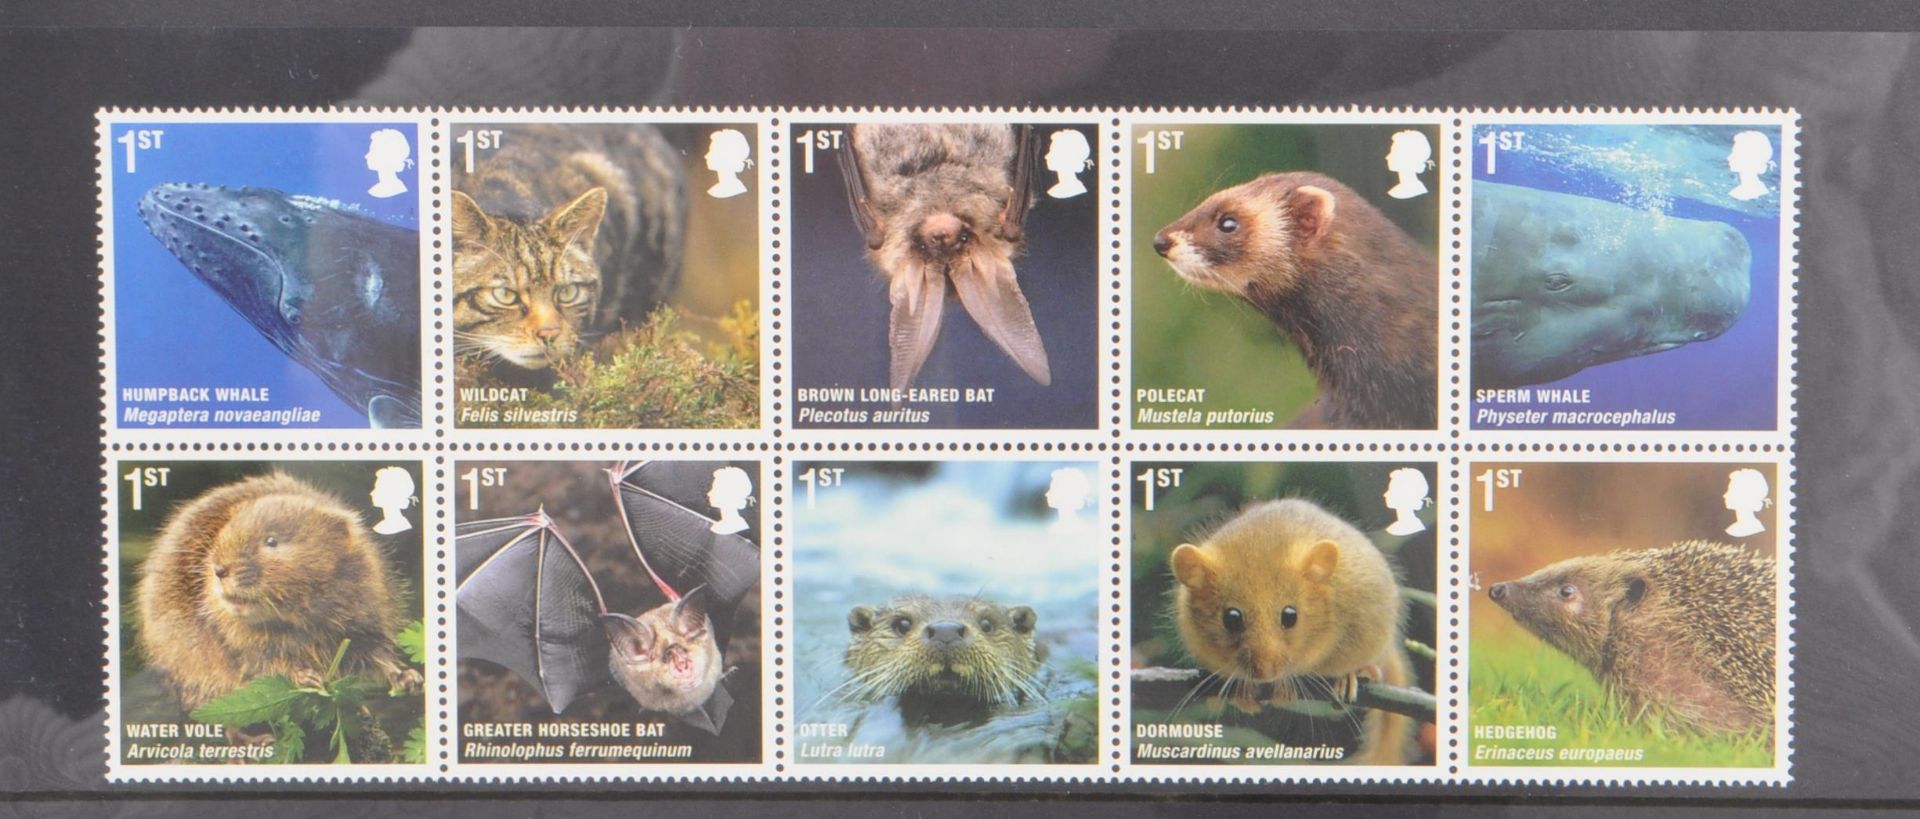 COLLECTION OF 21ST CENTURY BRITISH POSTAGE STAMPS - Image 7 of 7